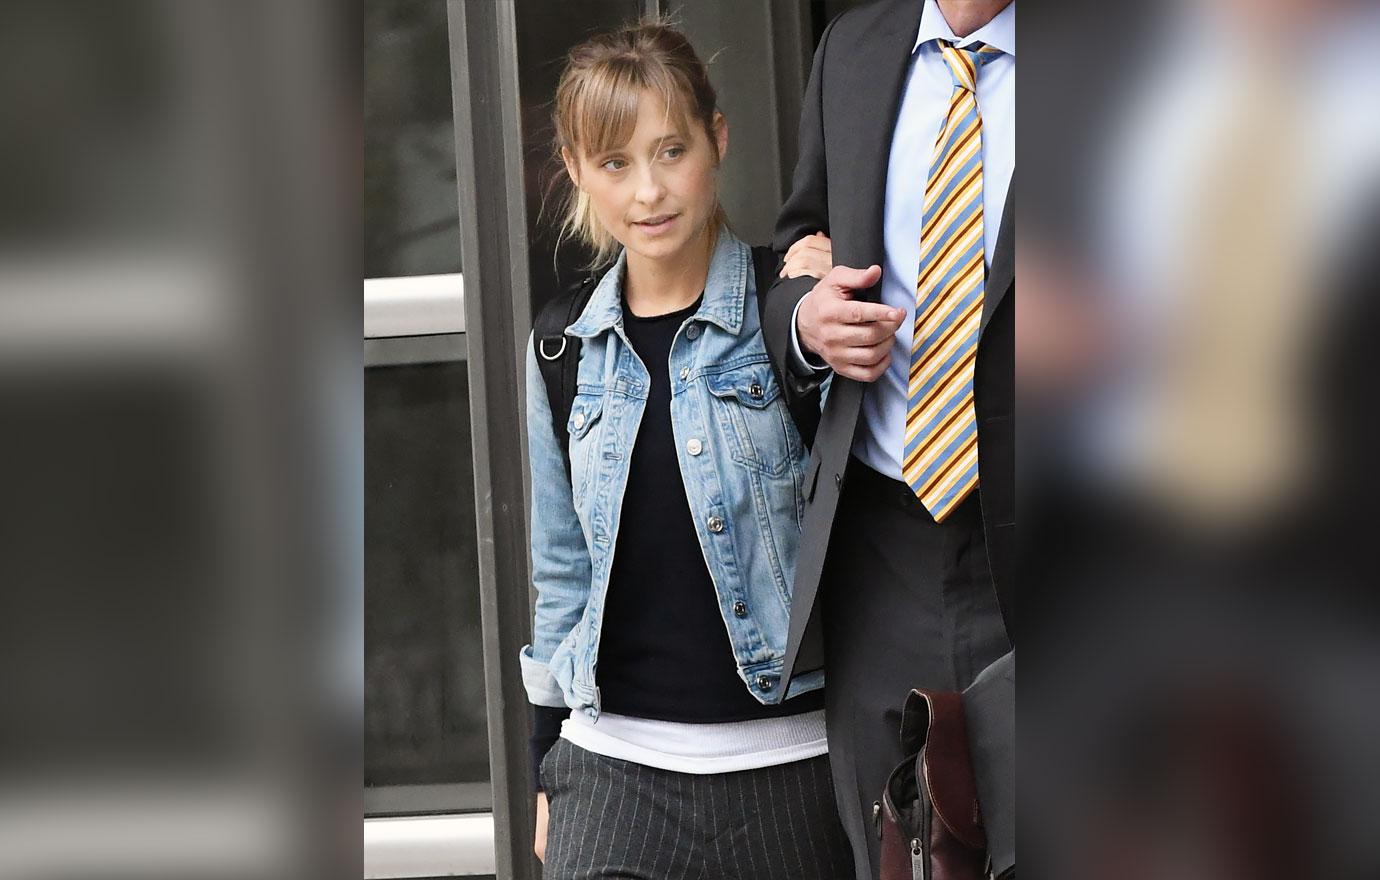 Allison Mack Begins 3 Year Prison Sentence Weeks Early After Pleading Guilty To Recruiting Nxivm